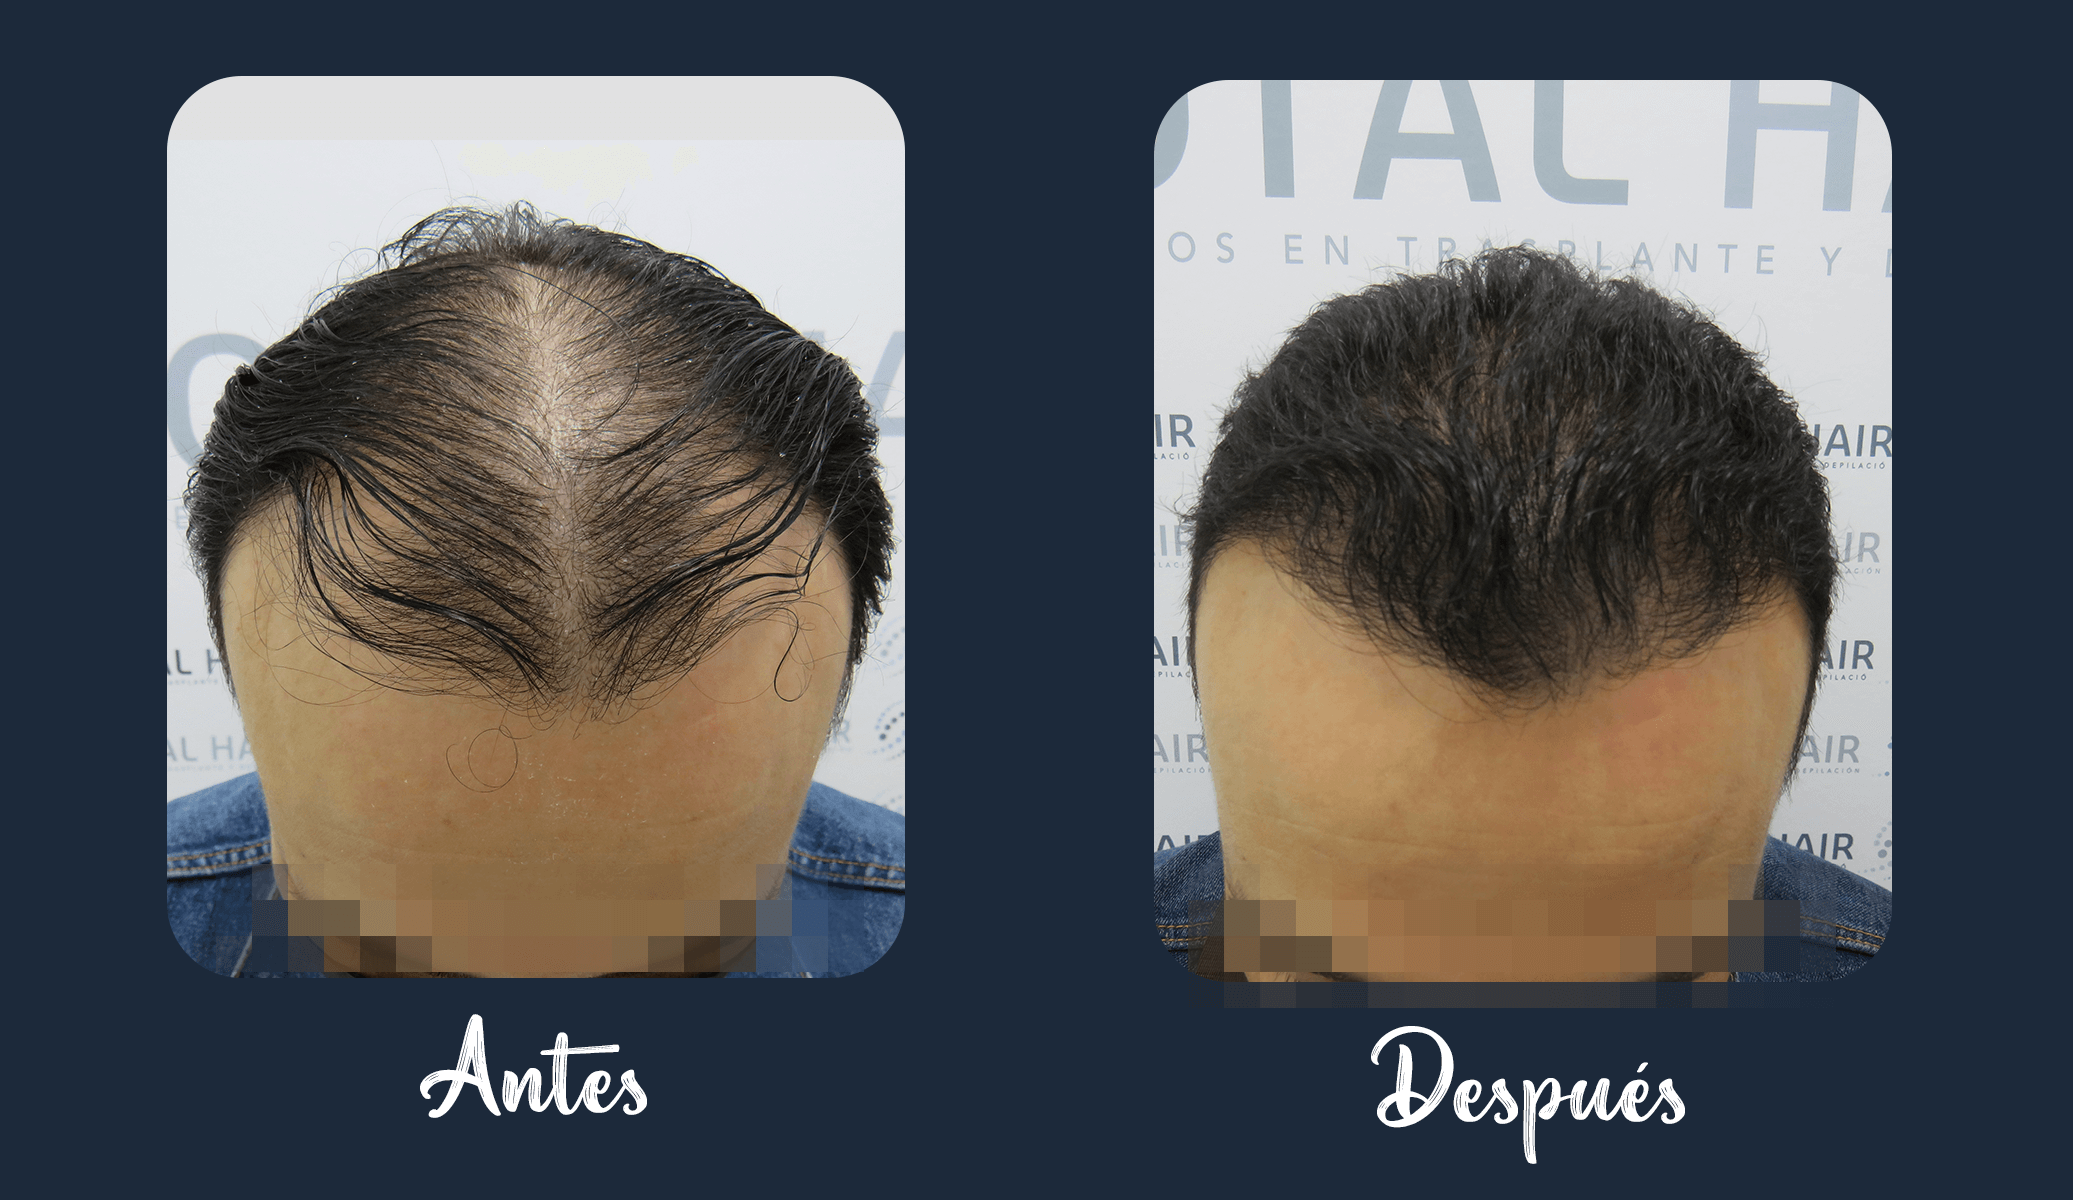 Hair Trasplant in Colombia - 10% discount!